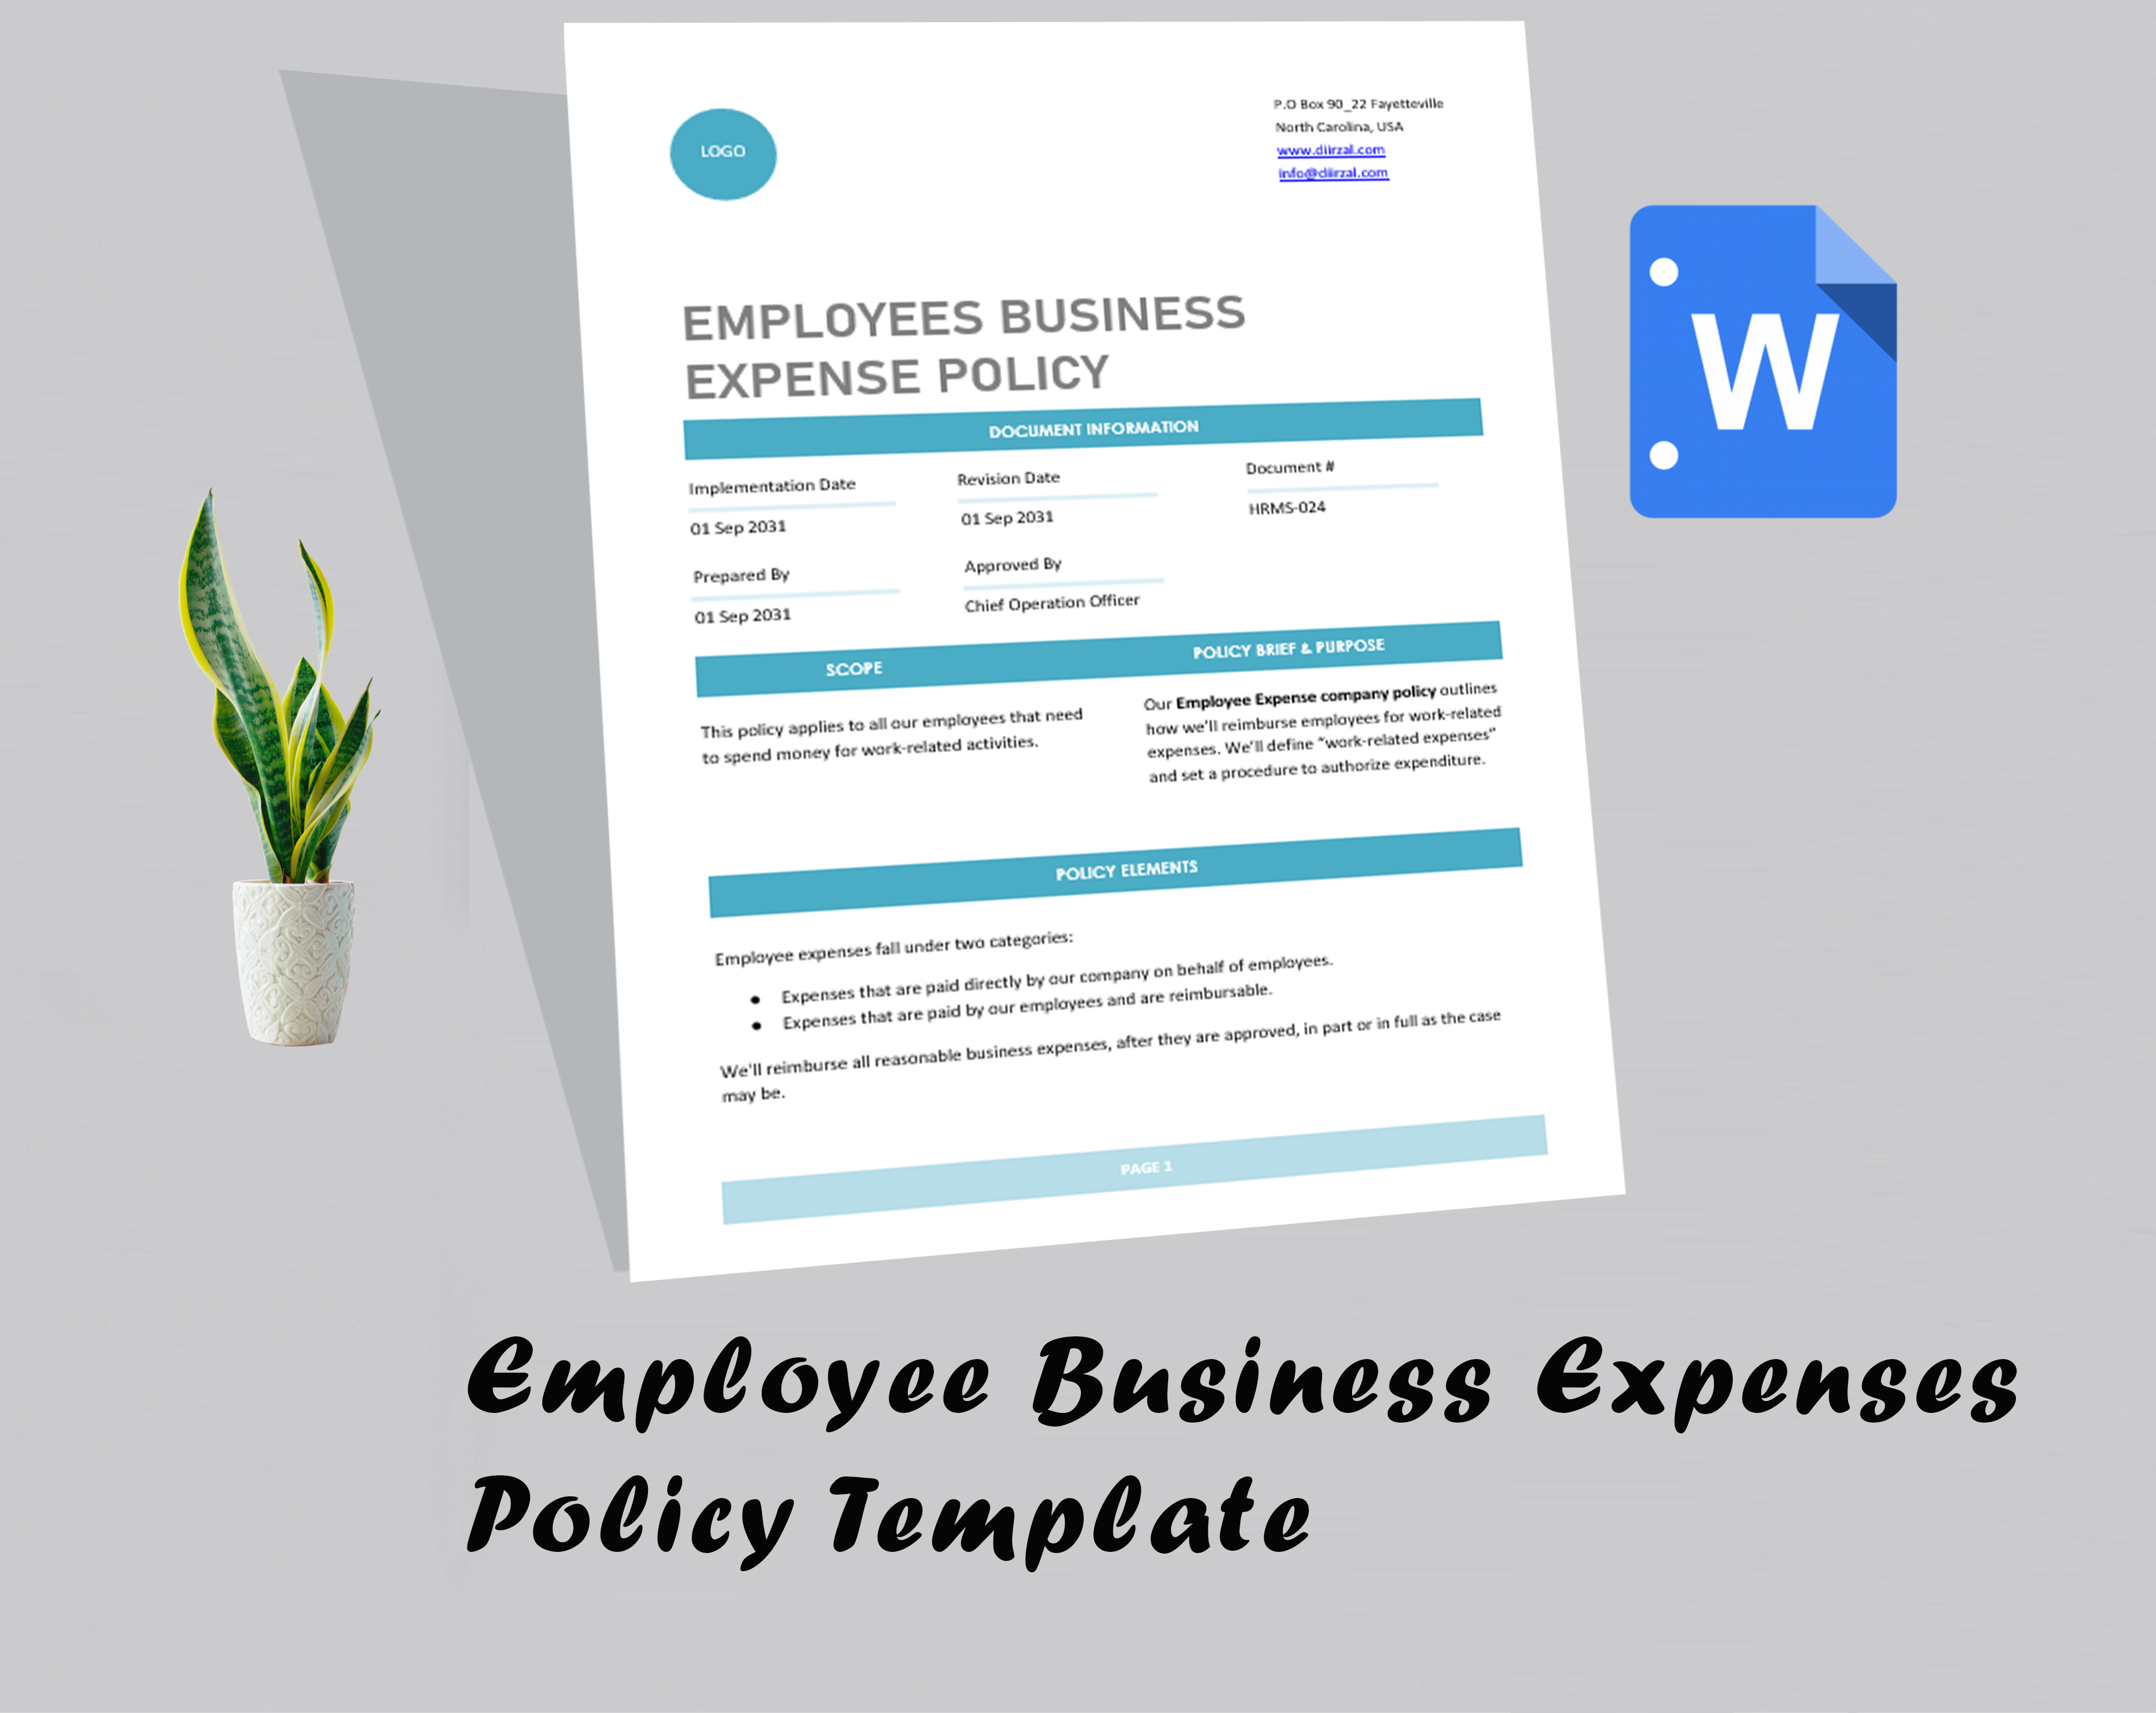 Employee Business Expenses Policy Template